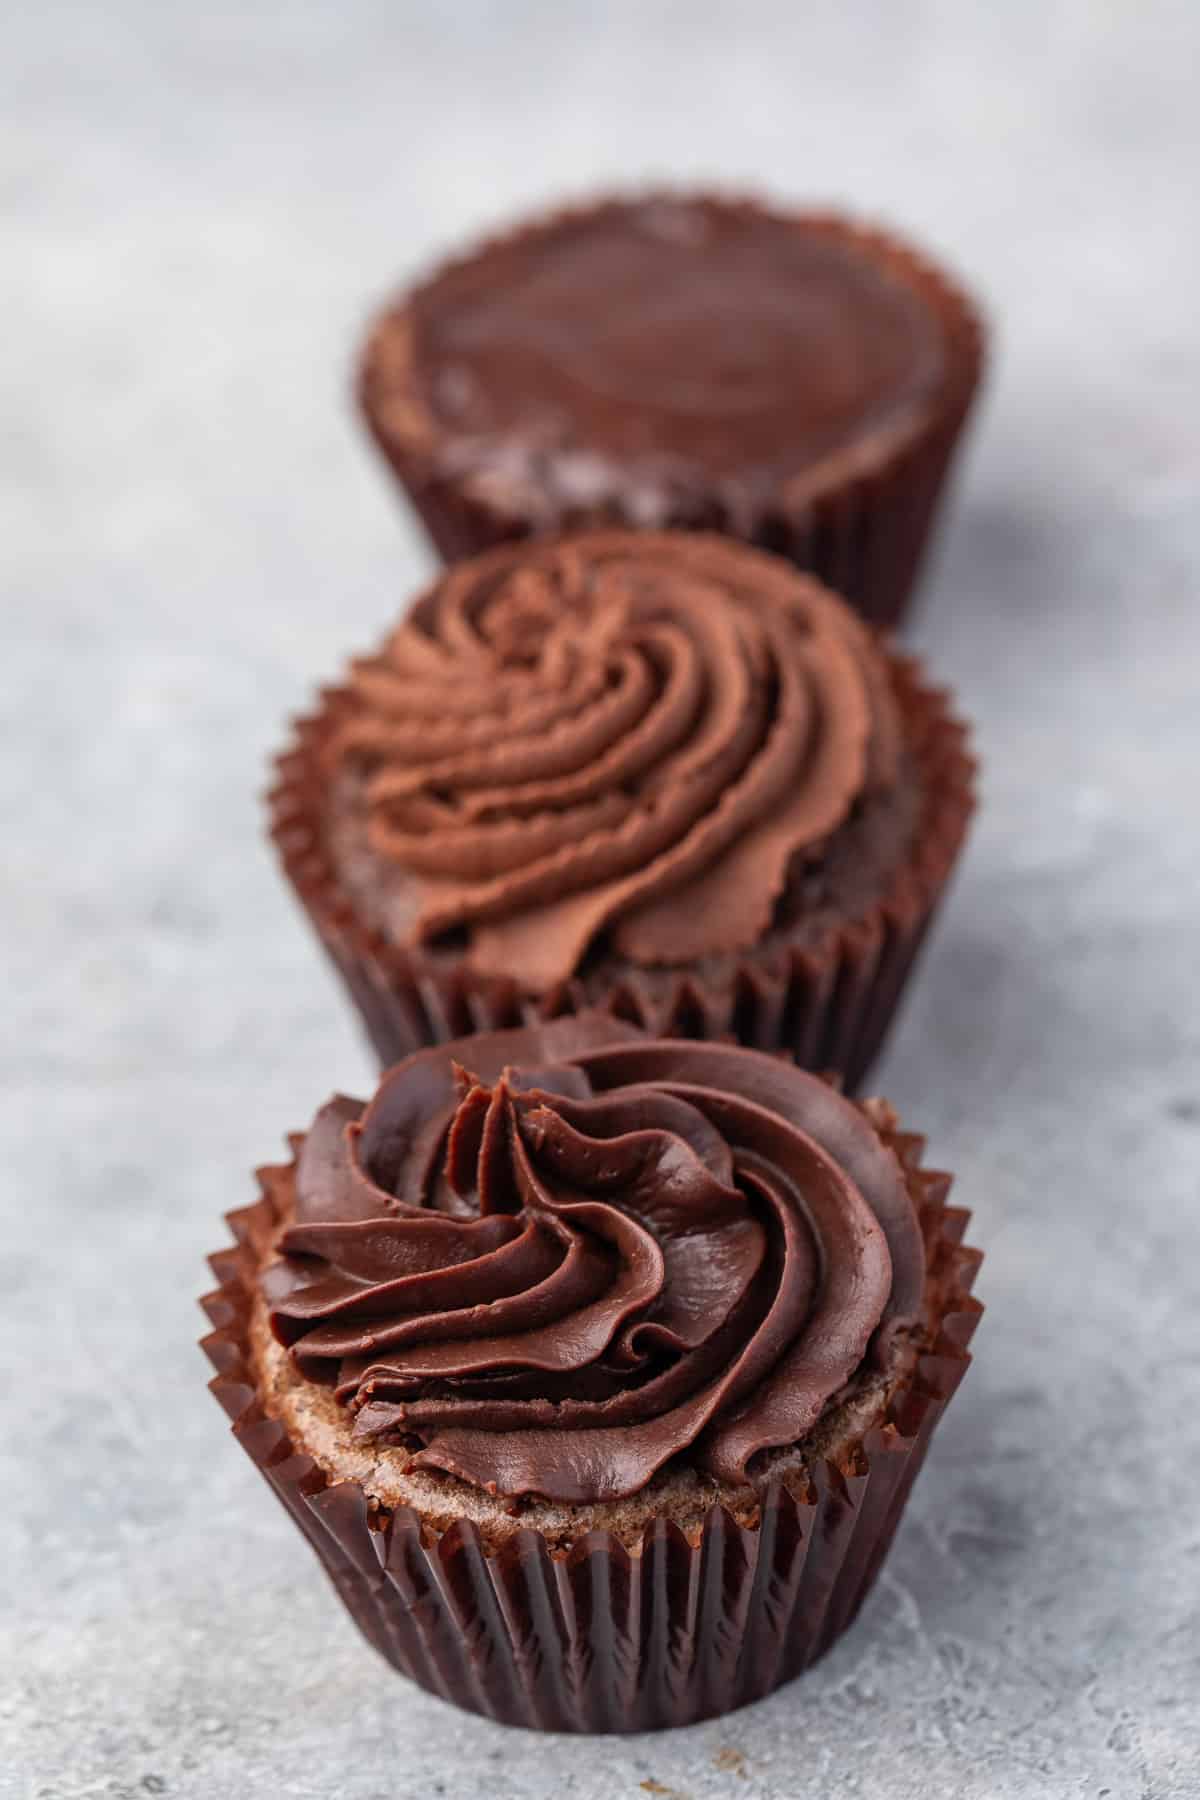 3 chocolate cupcakes with different types of ganache frosting